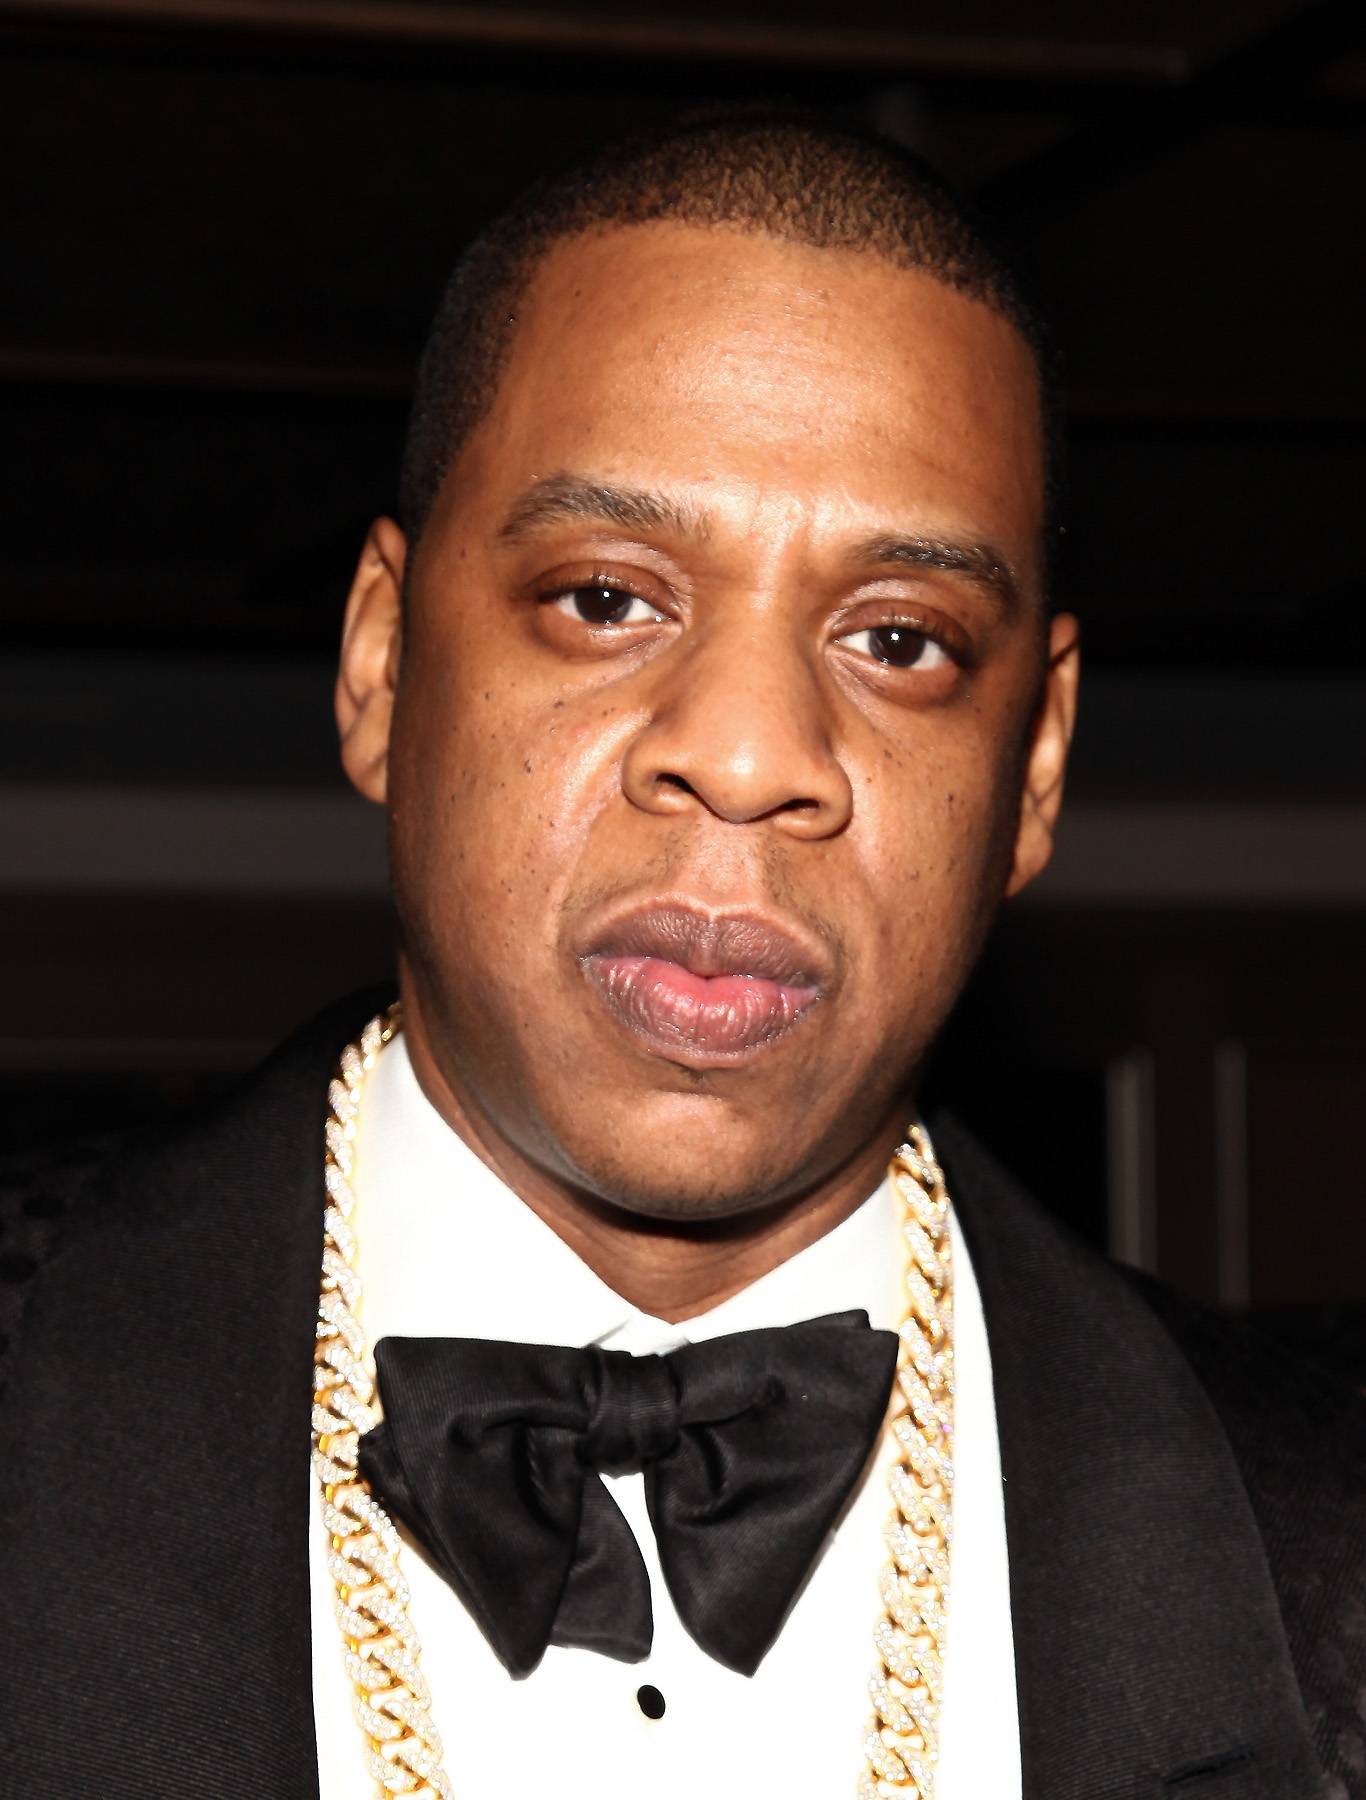 Jay-Z  - If it could happen to Jay, it could happen to anyone, right? Even the Roc-a-Fella mogul couldn't avoid foreclosure when he and his partners went to battle with their lenders over a $52 million deal, which eventually went sour, for his planned J Hotel in New York City.(Photo: Paul Zimmerman/Getty Images)